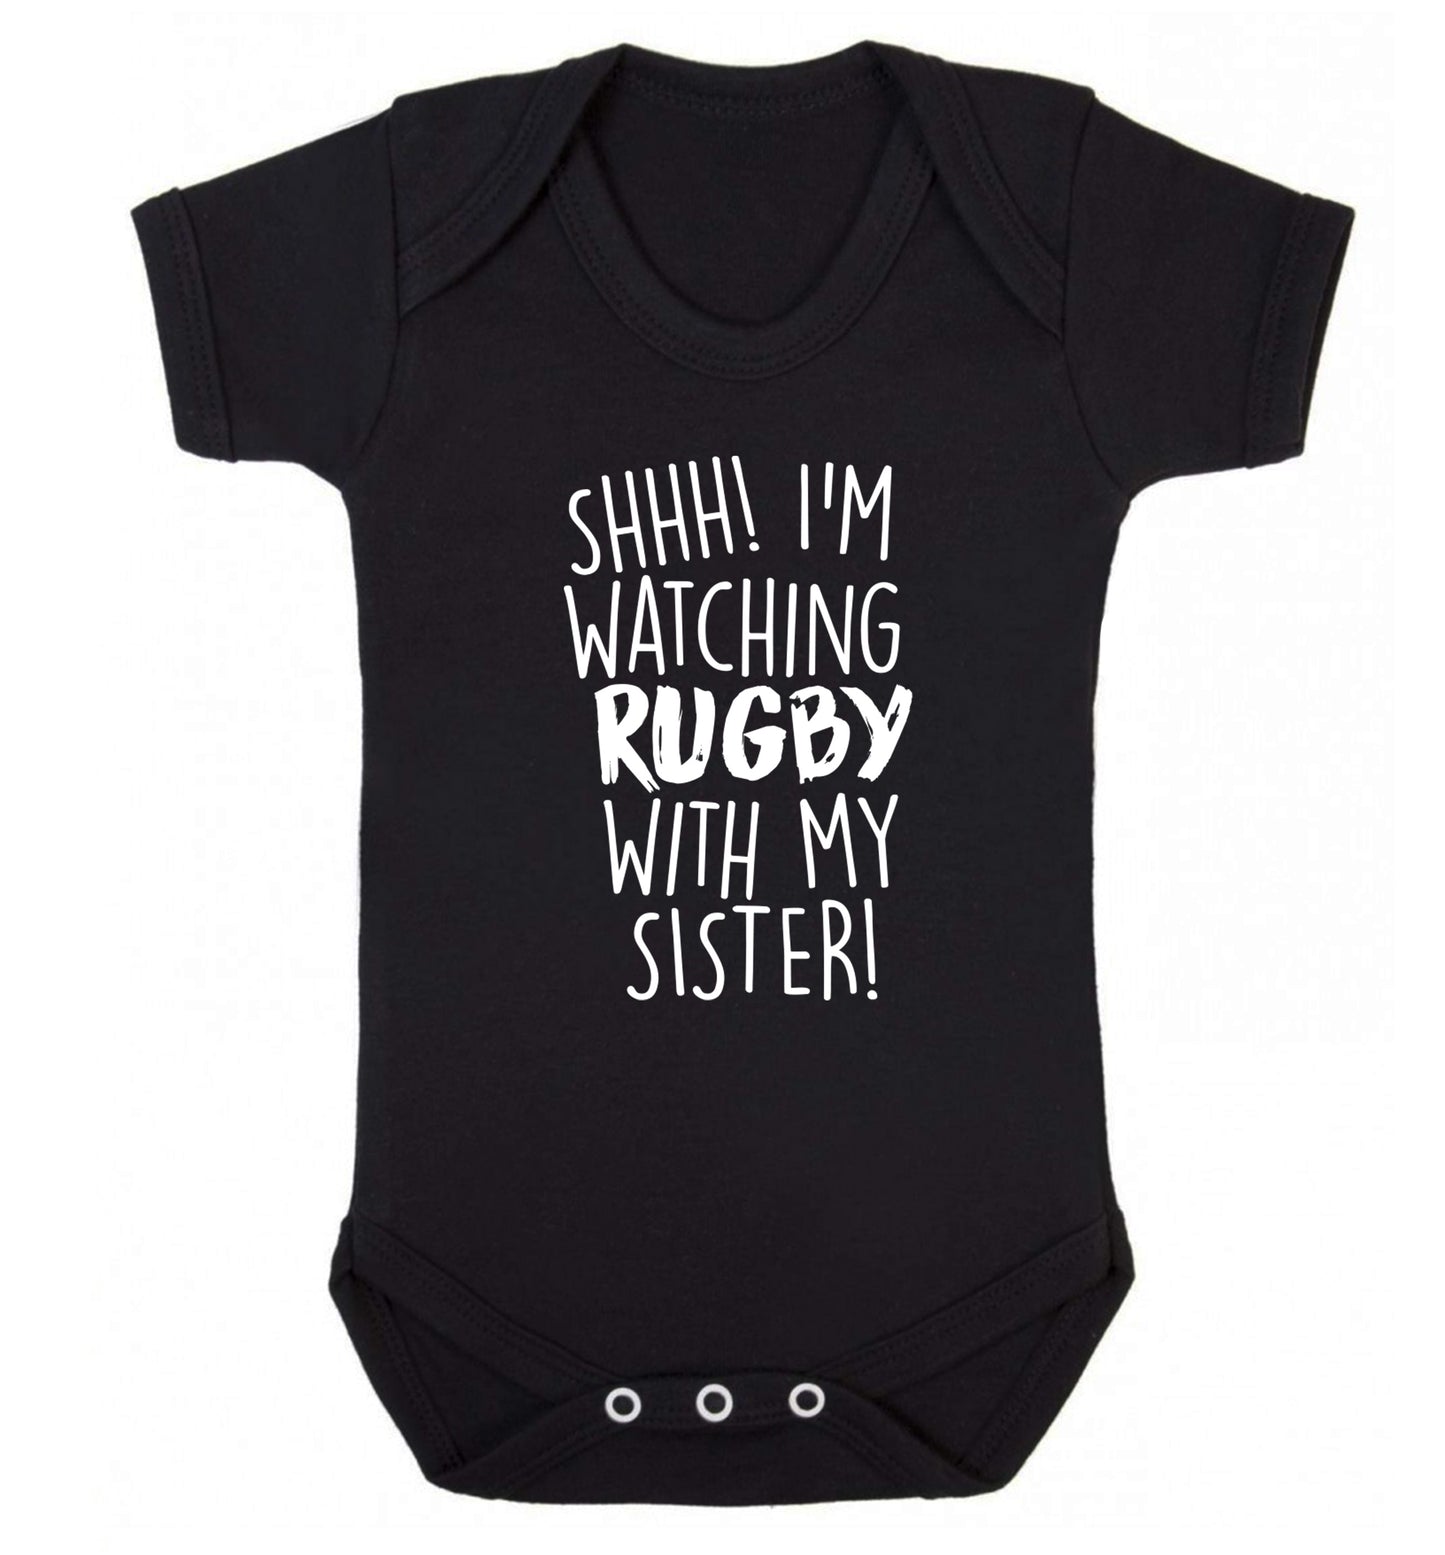 Shh... I'm watching rugby with my sister Baby Vest black 18-24 months